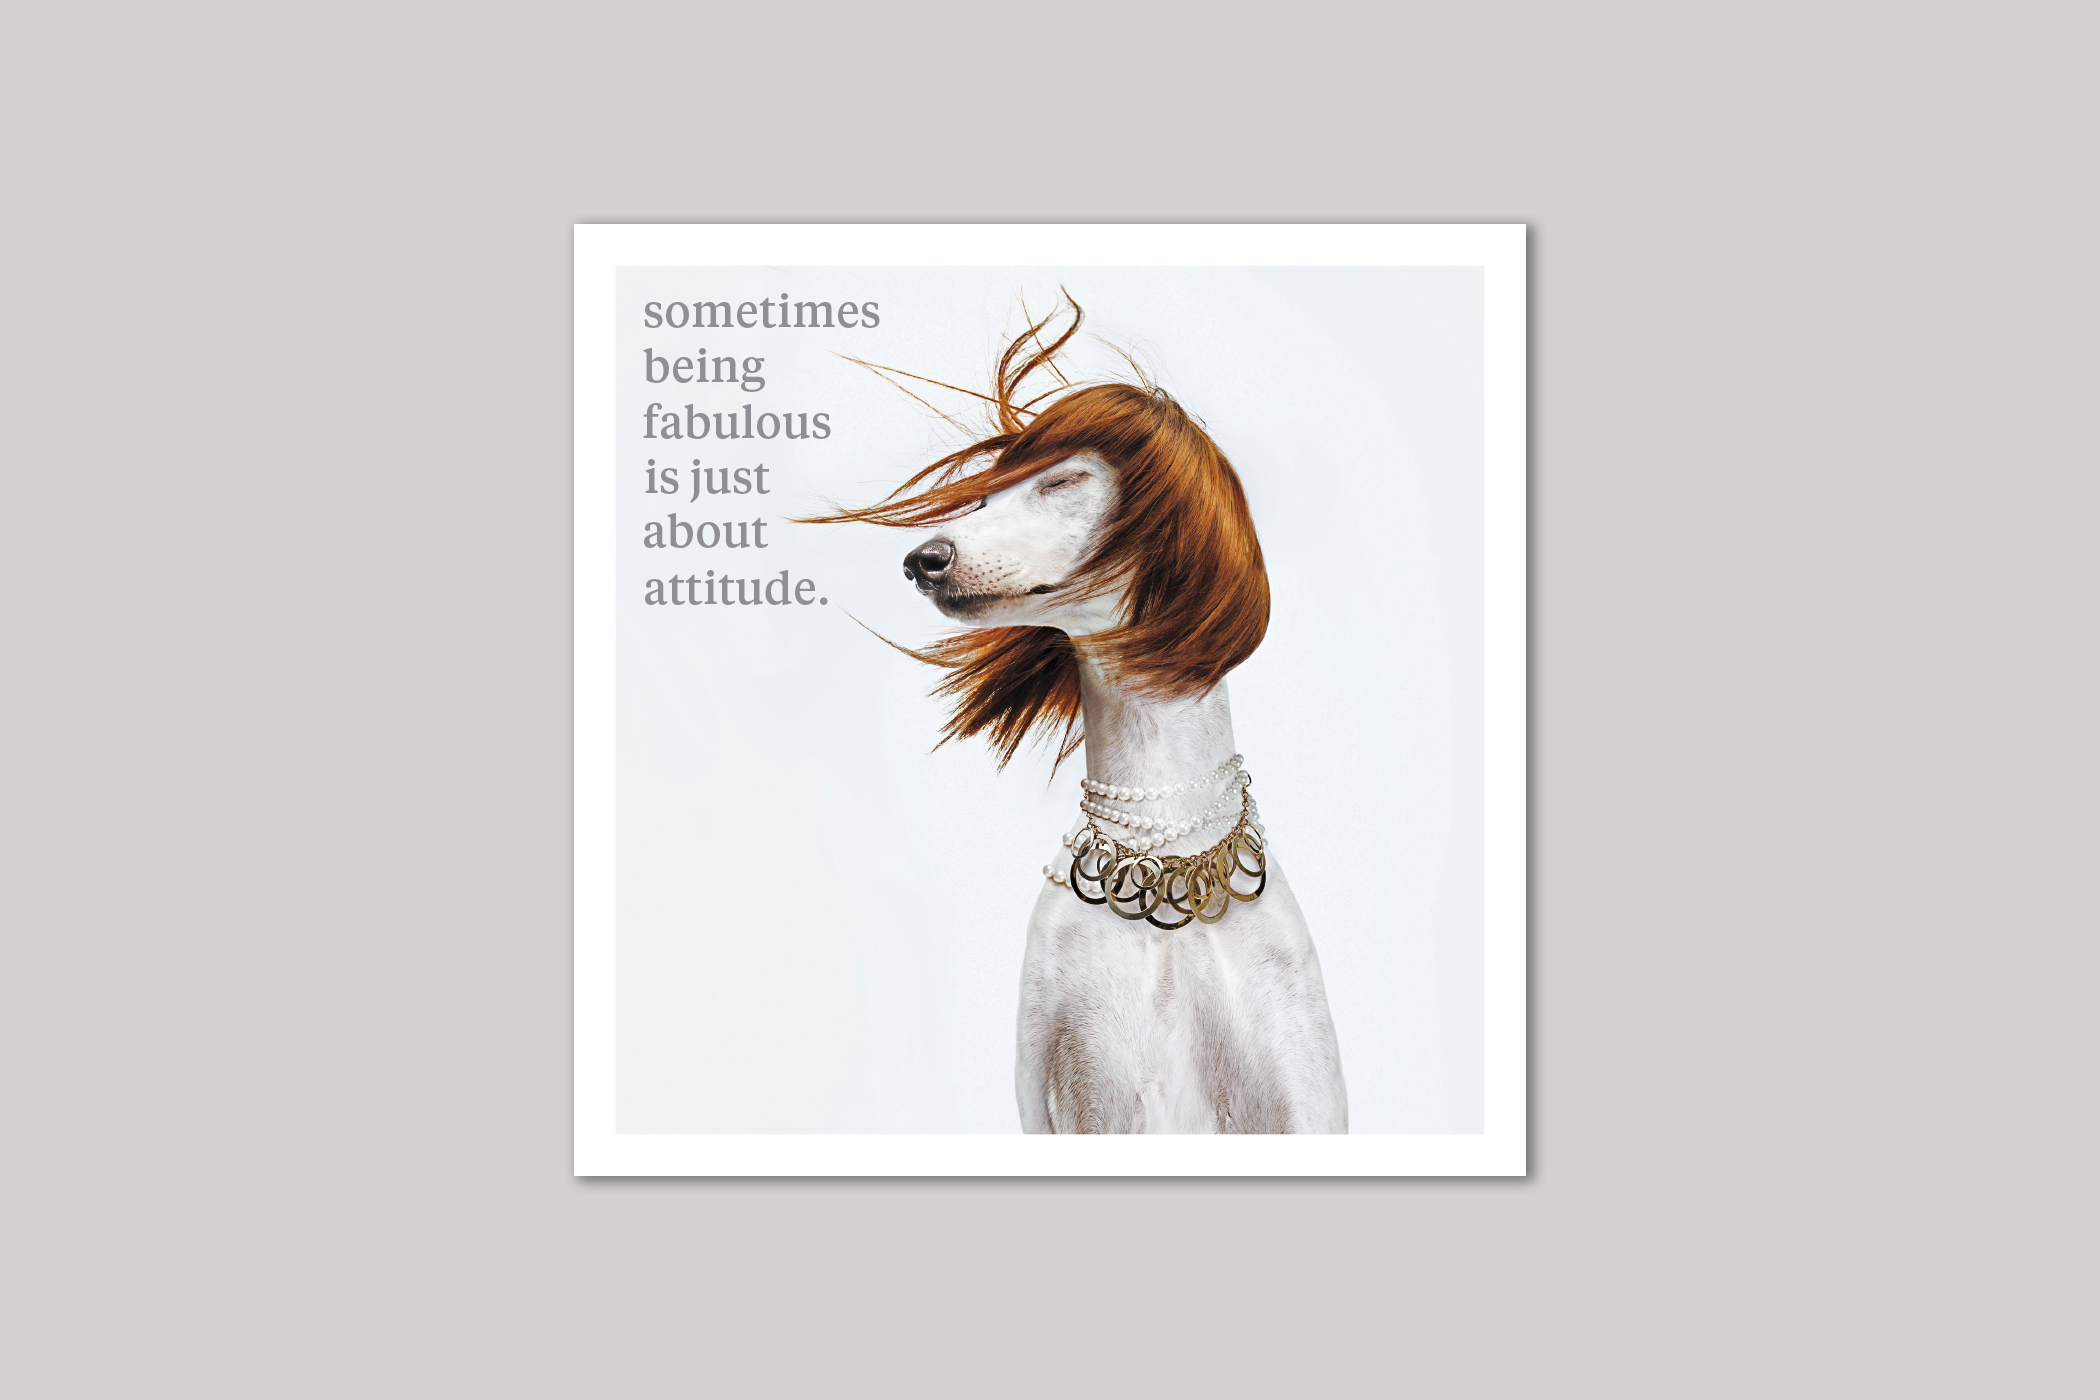 Being Fabulous quirky animal portrait from Curious World range of greeting cards by Icon.